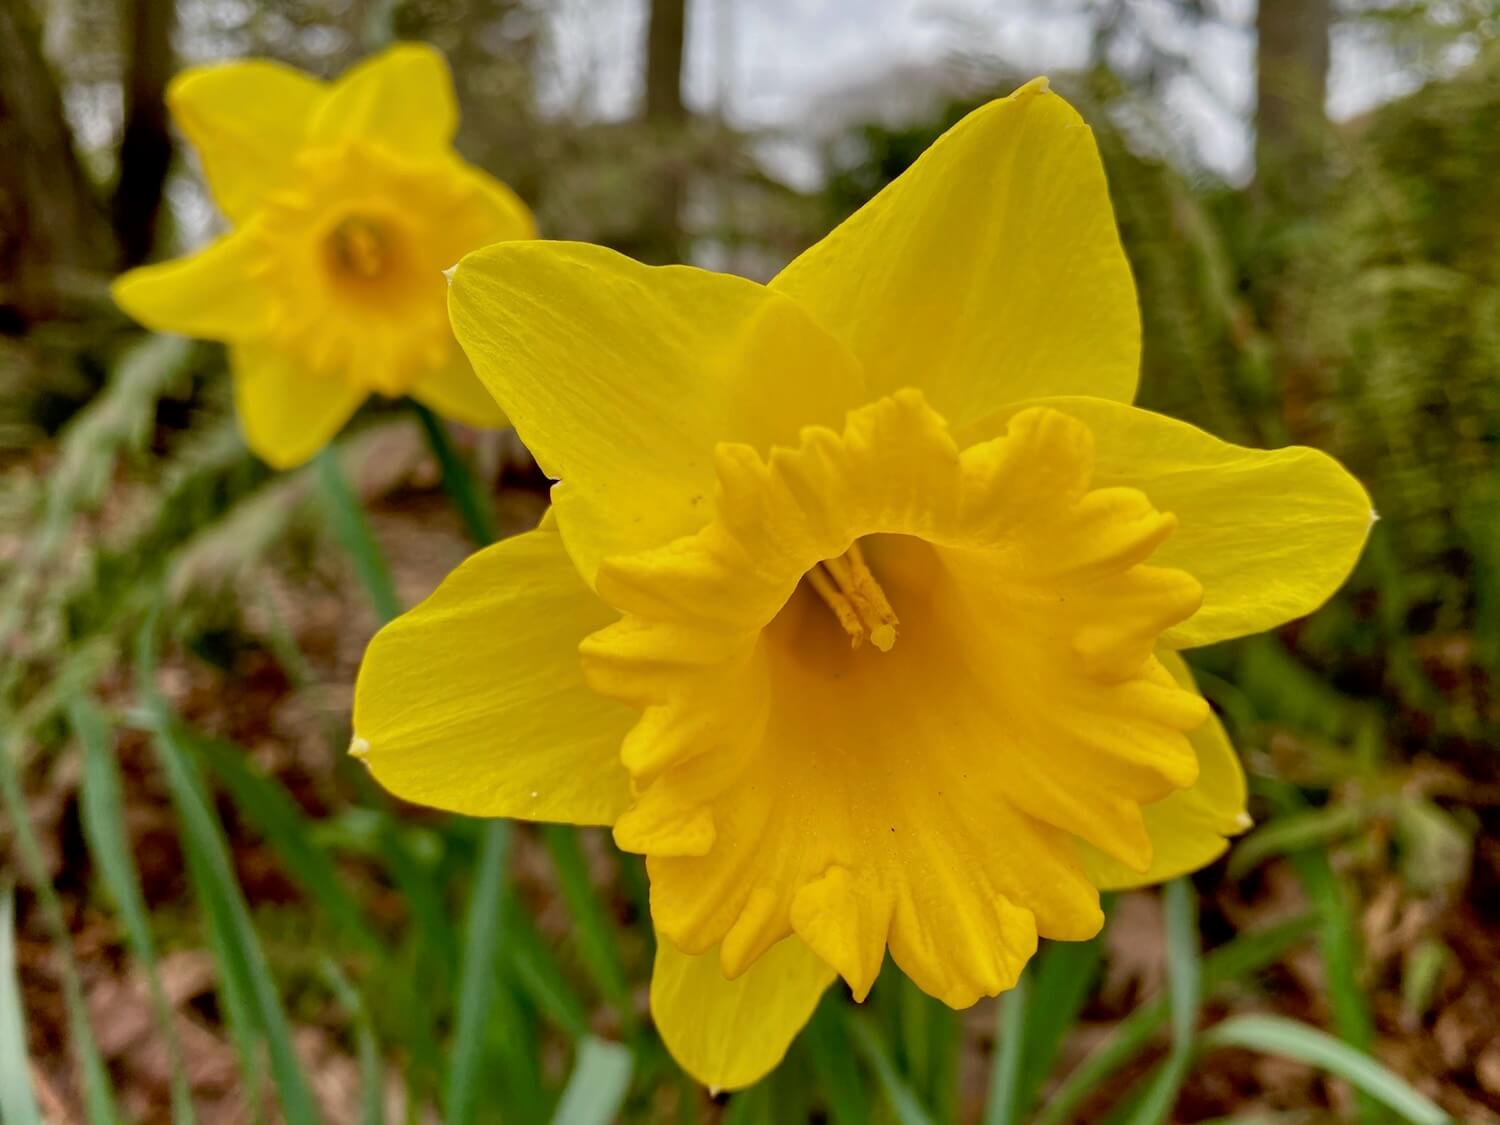 Bright yellow daffodil comes to life, with a second partner in the background slightly out of focus. The yellow ruffles are dainty and surround the central pistols dripping with pollen. The background hosts out of focus green ferns and park ground cover.